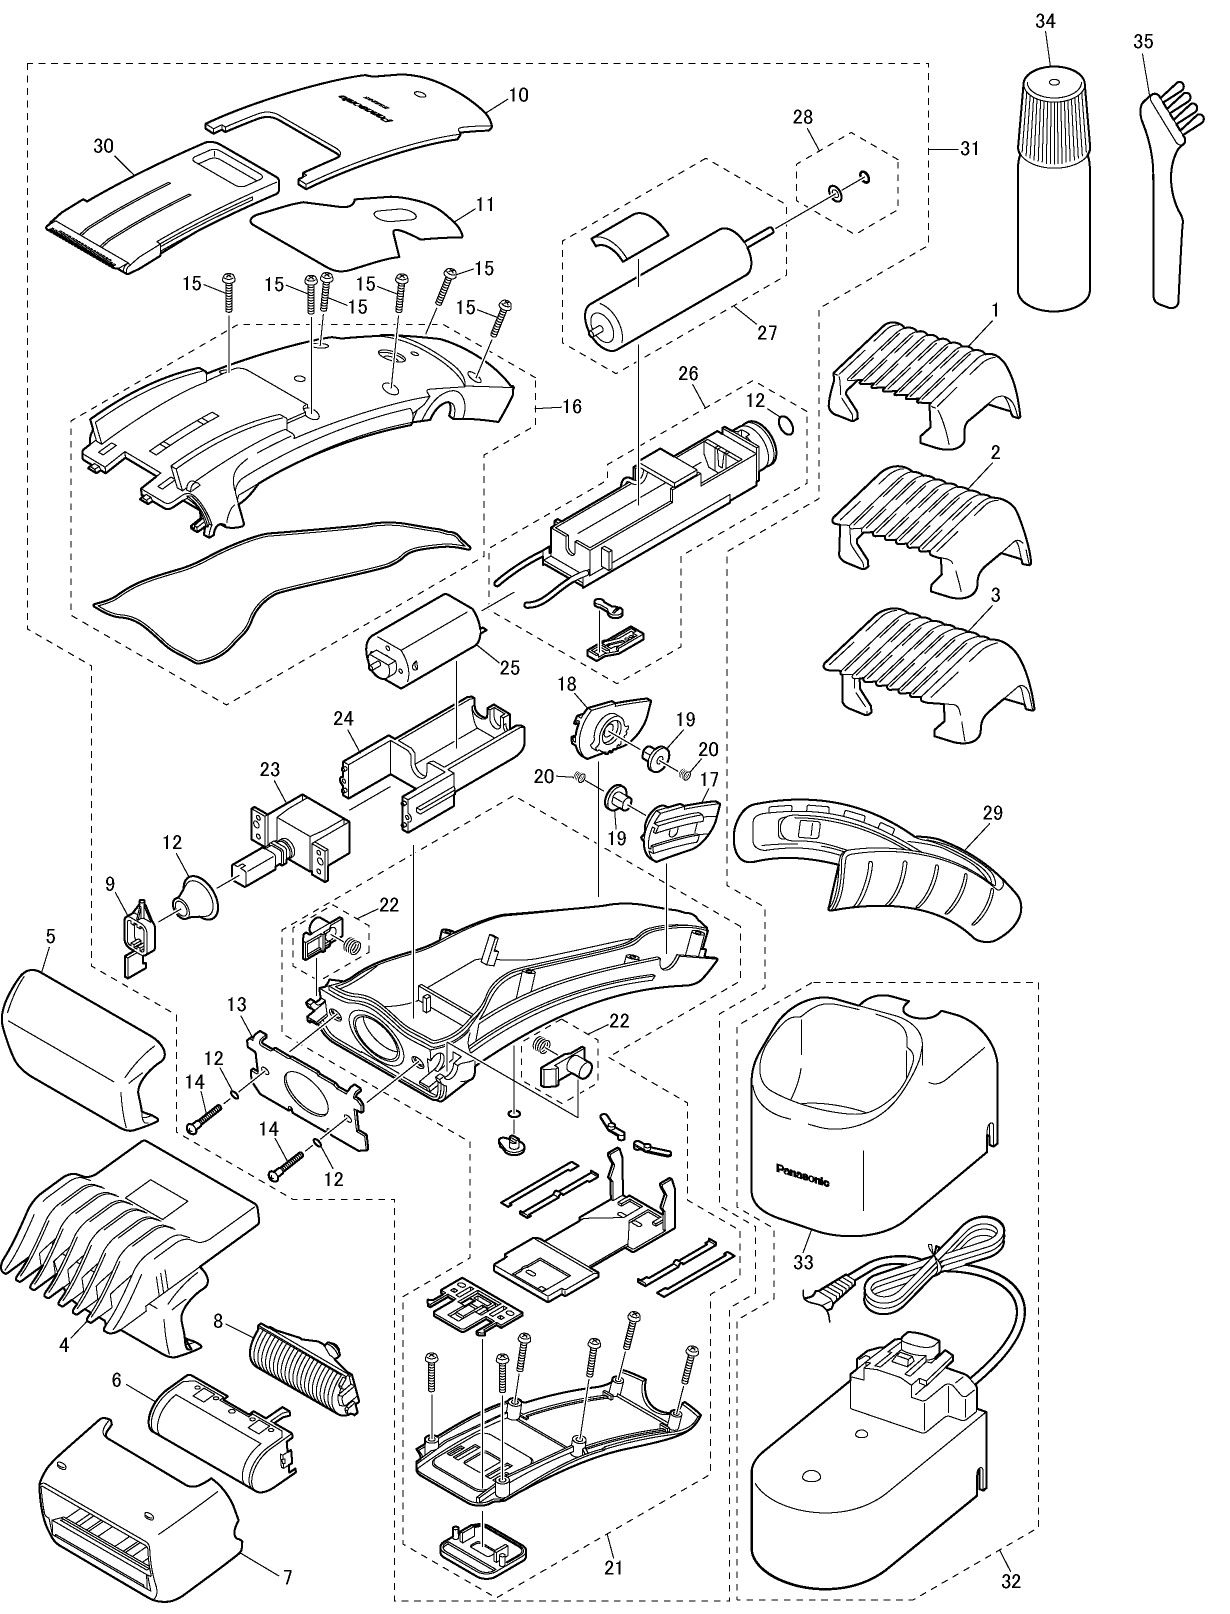 ER-GY50: Exploded View